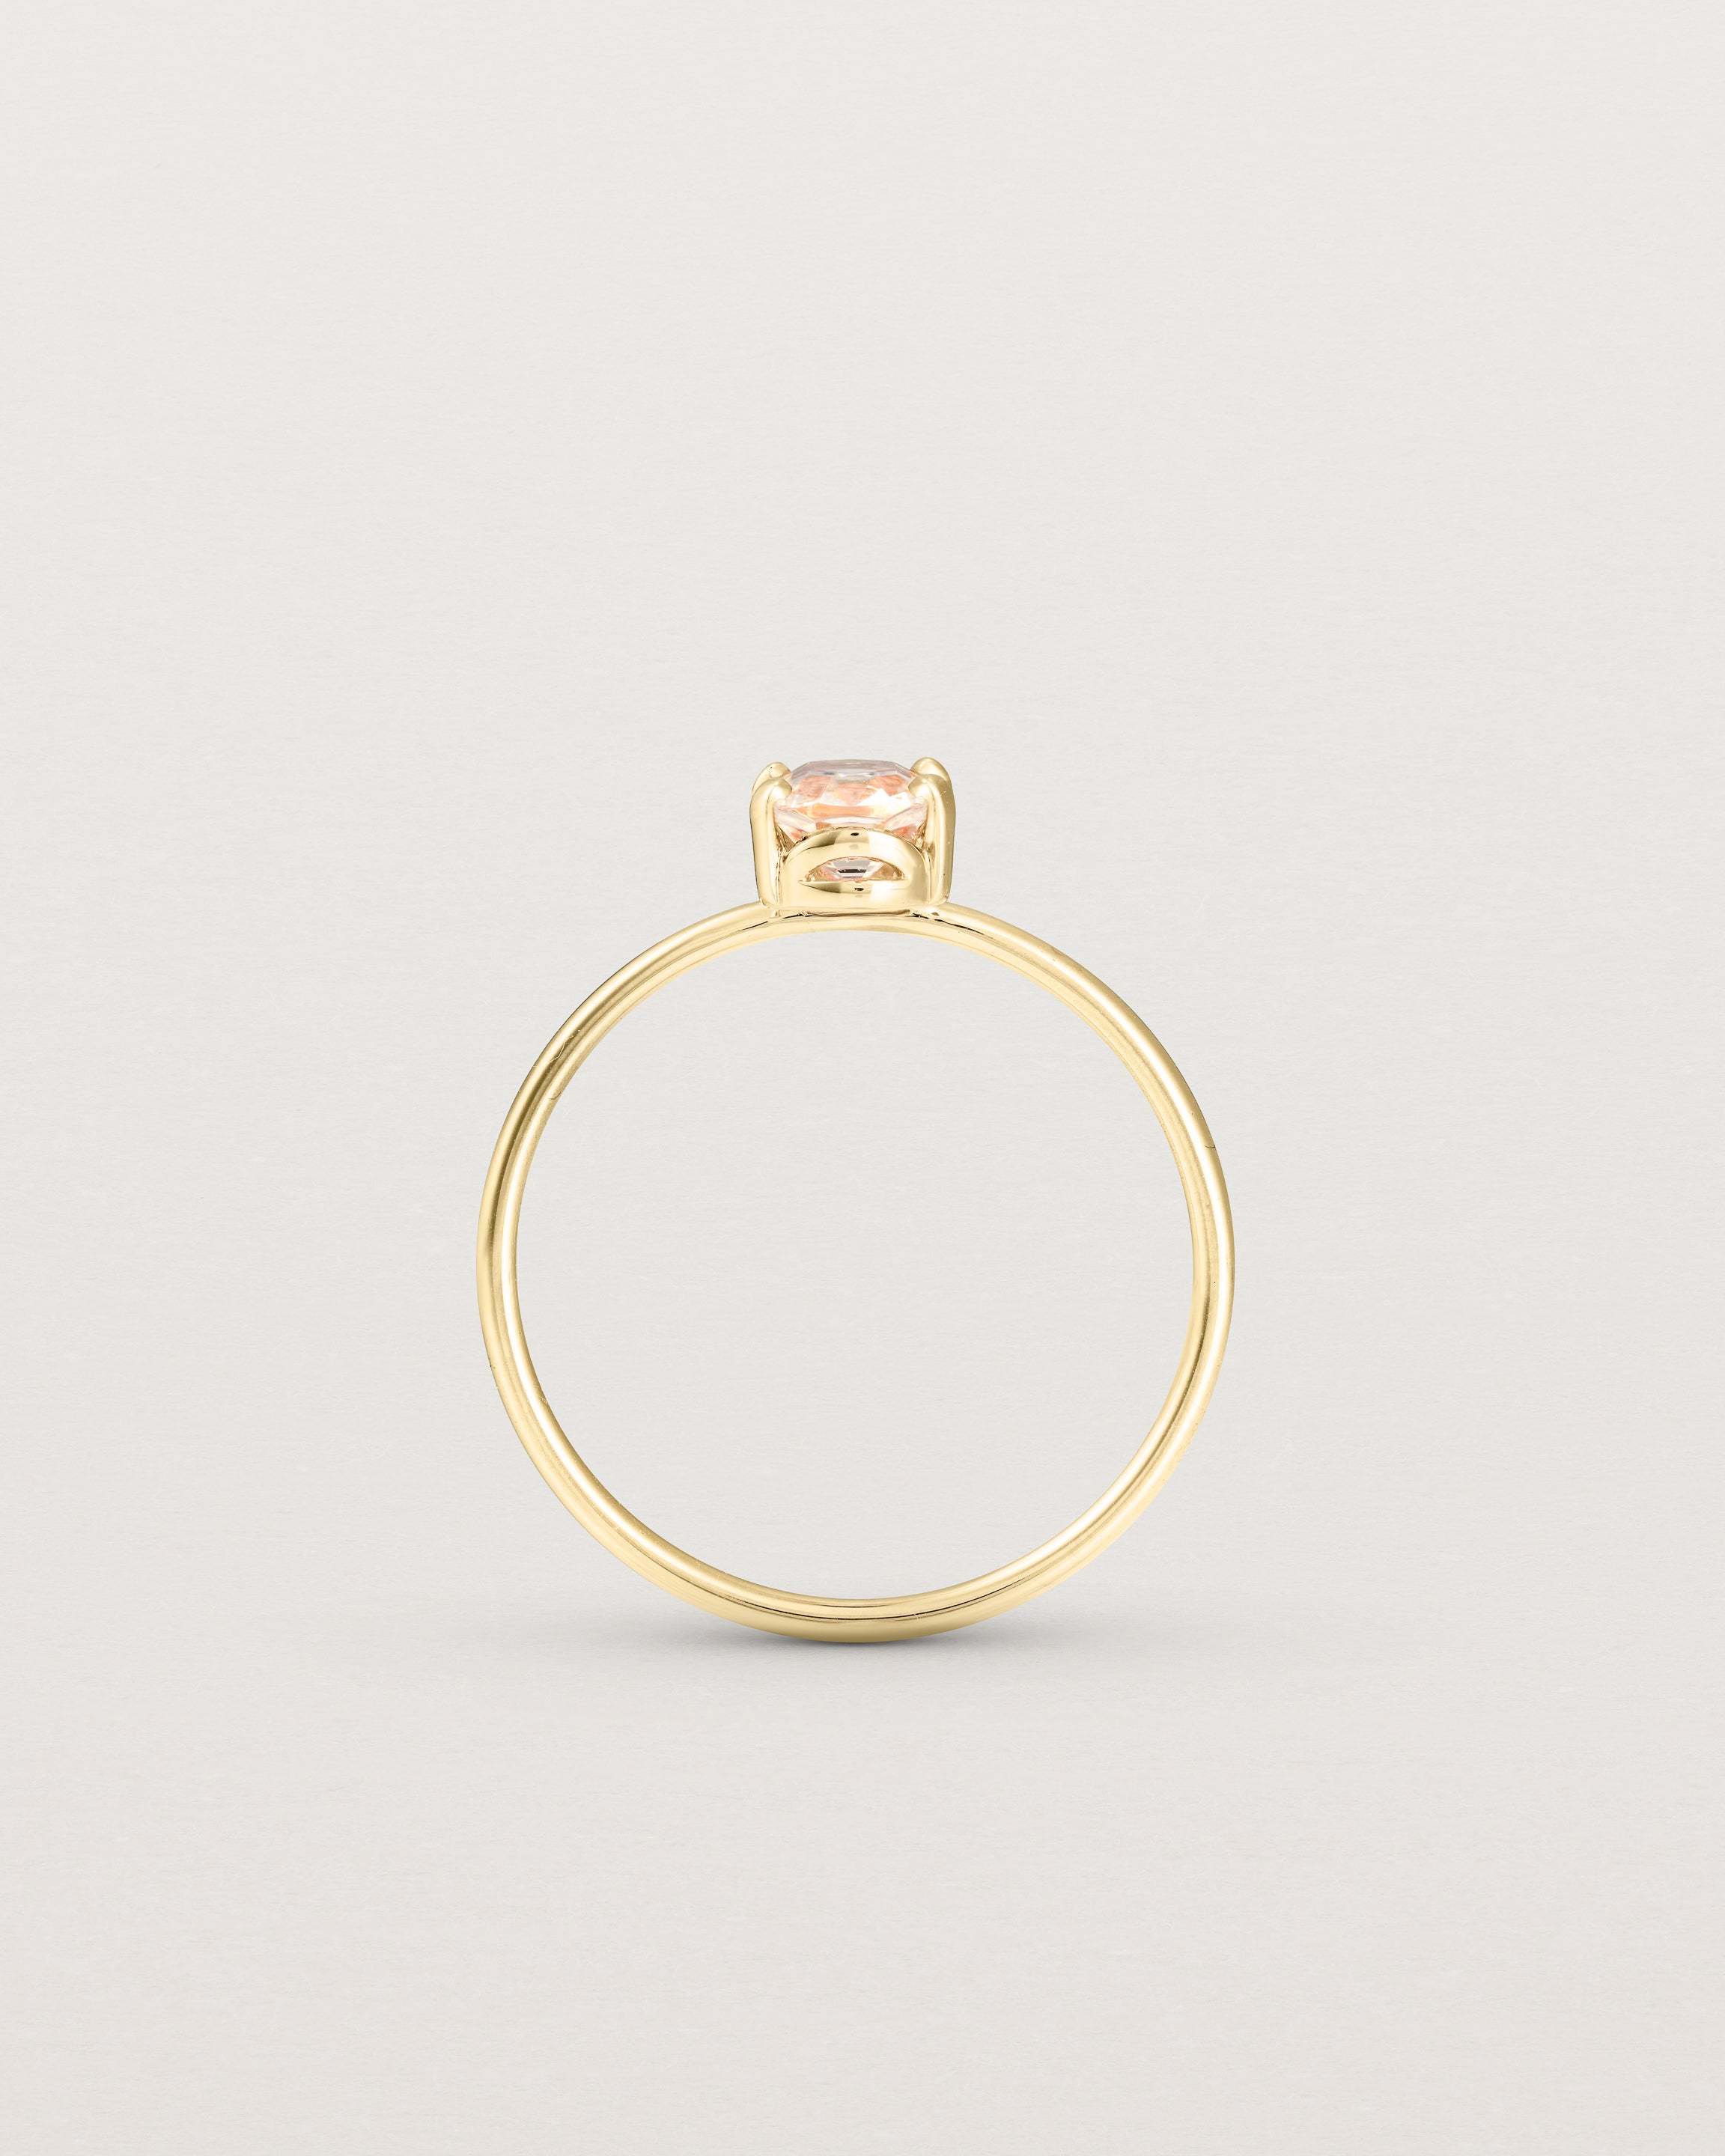 Standing view of the Tiny Fei Ring | Morganite in yellow gold.